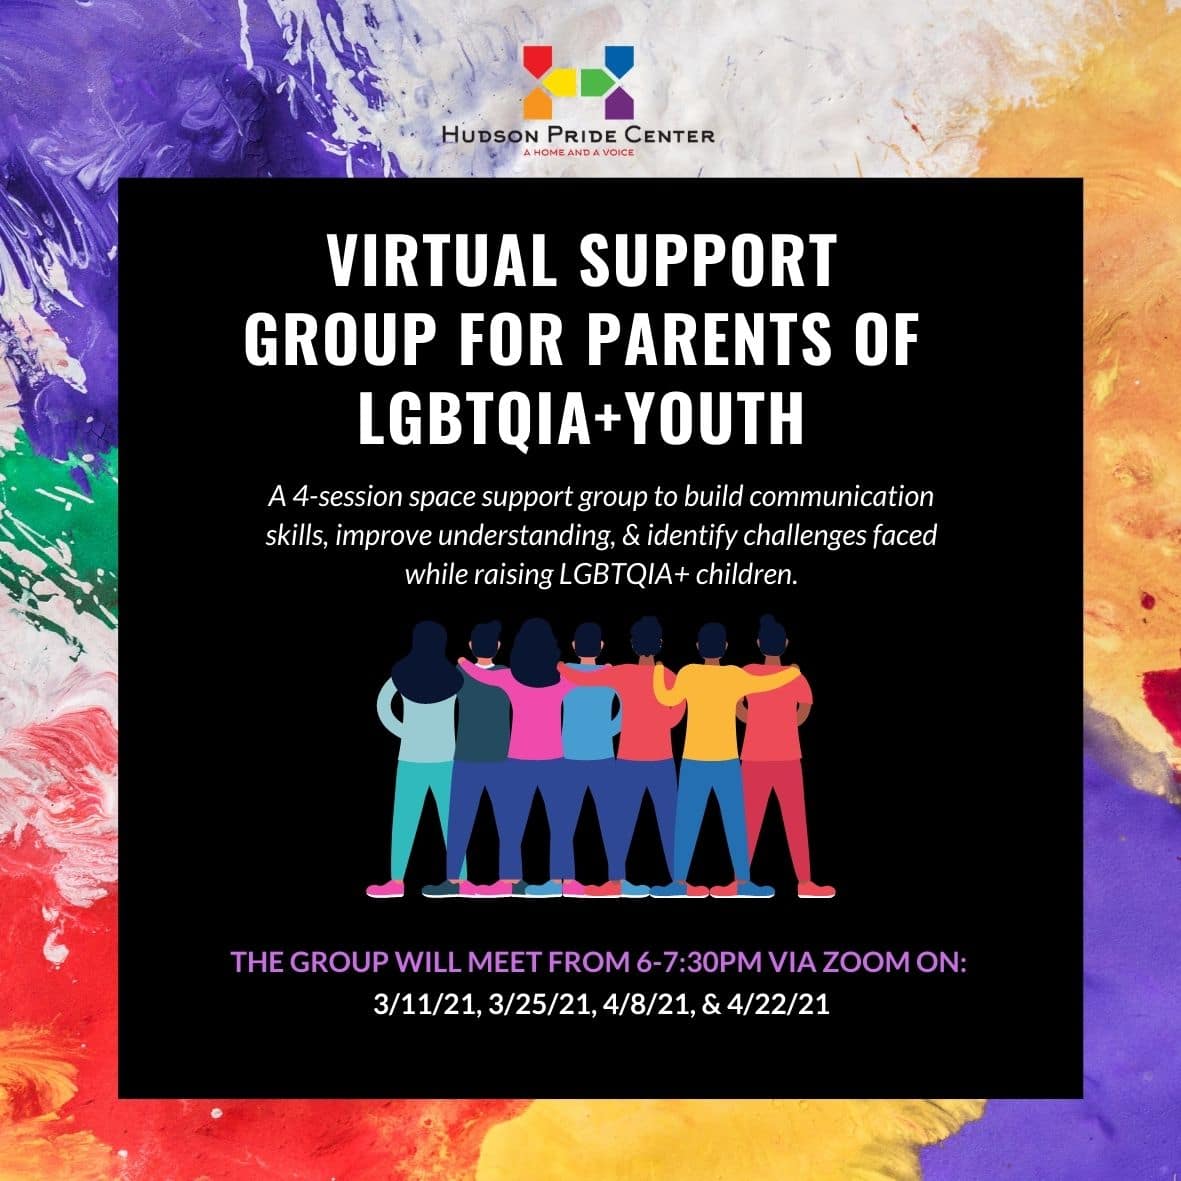 Virtual Parent Support Group